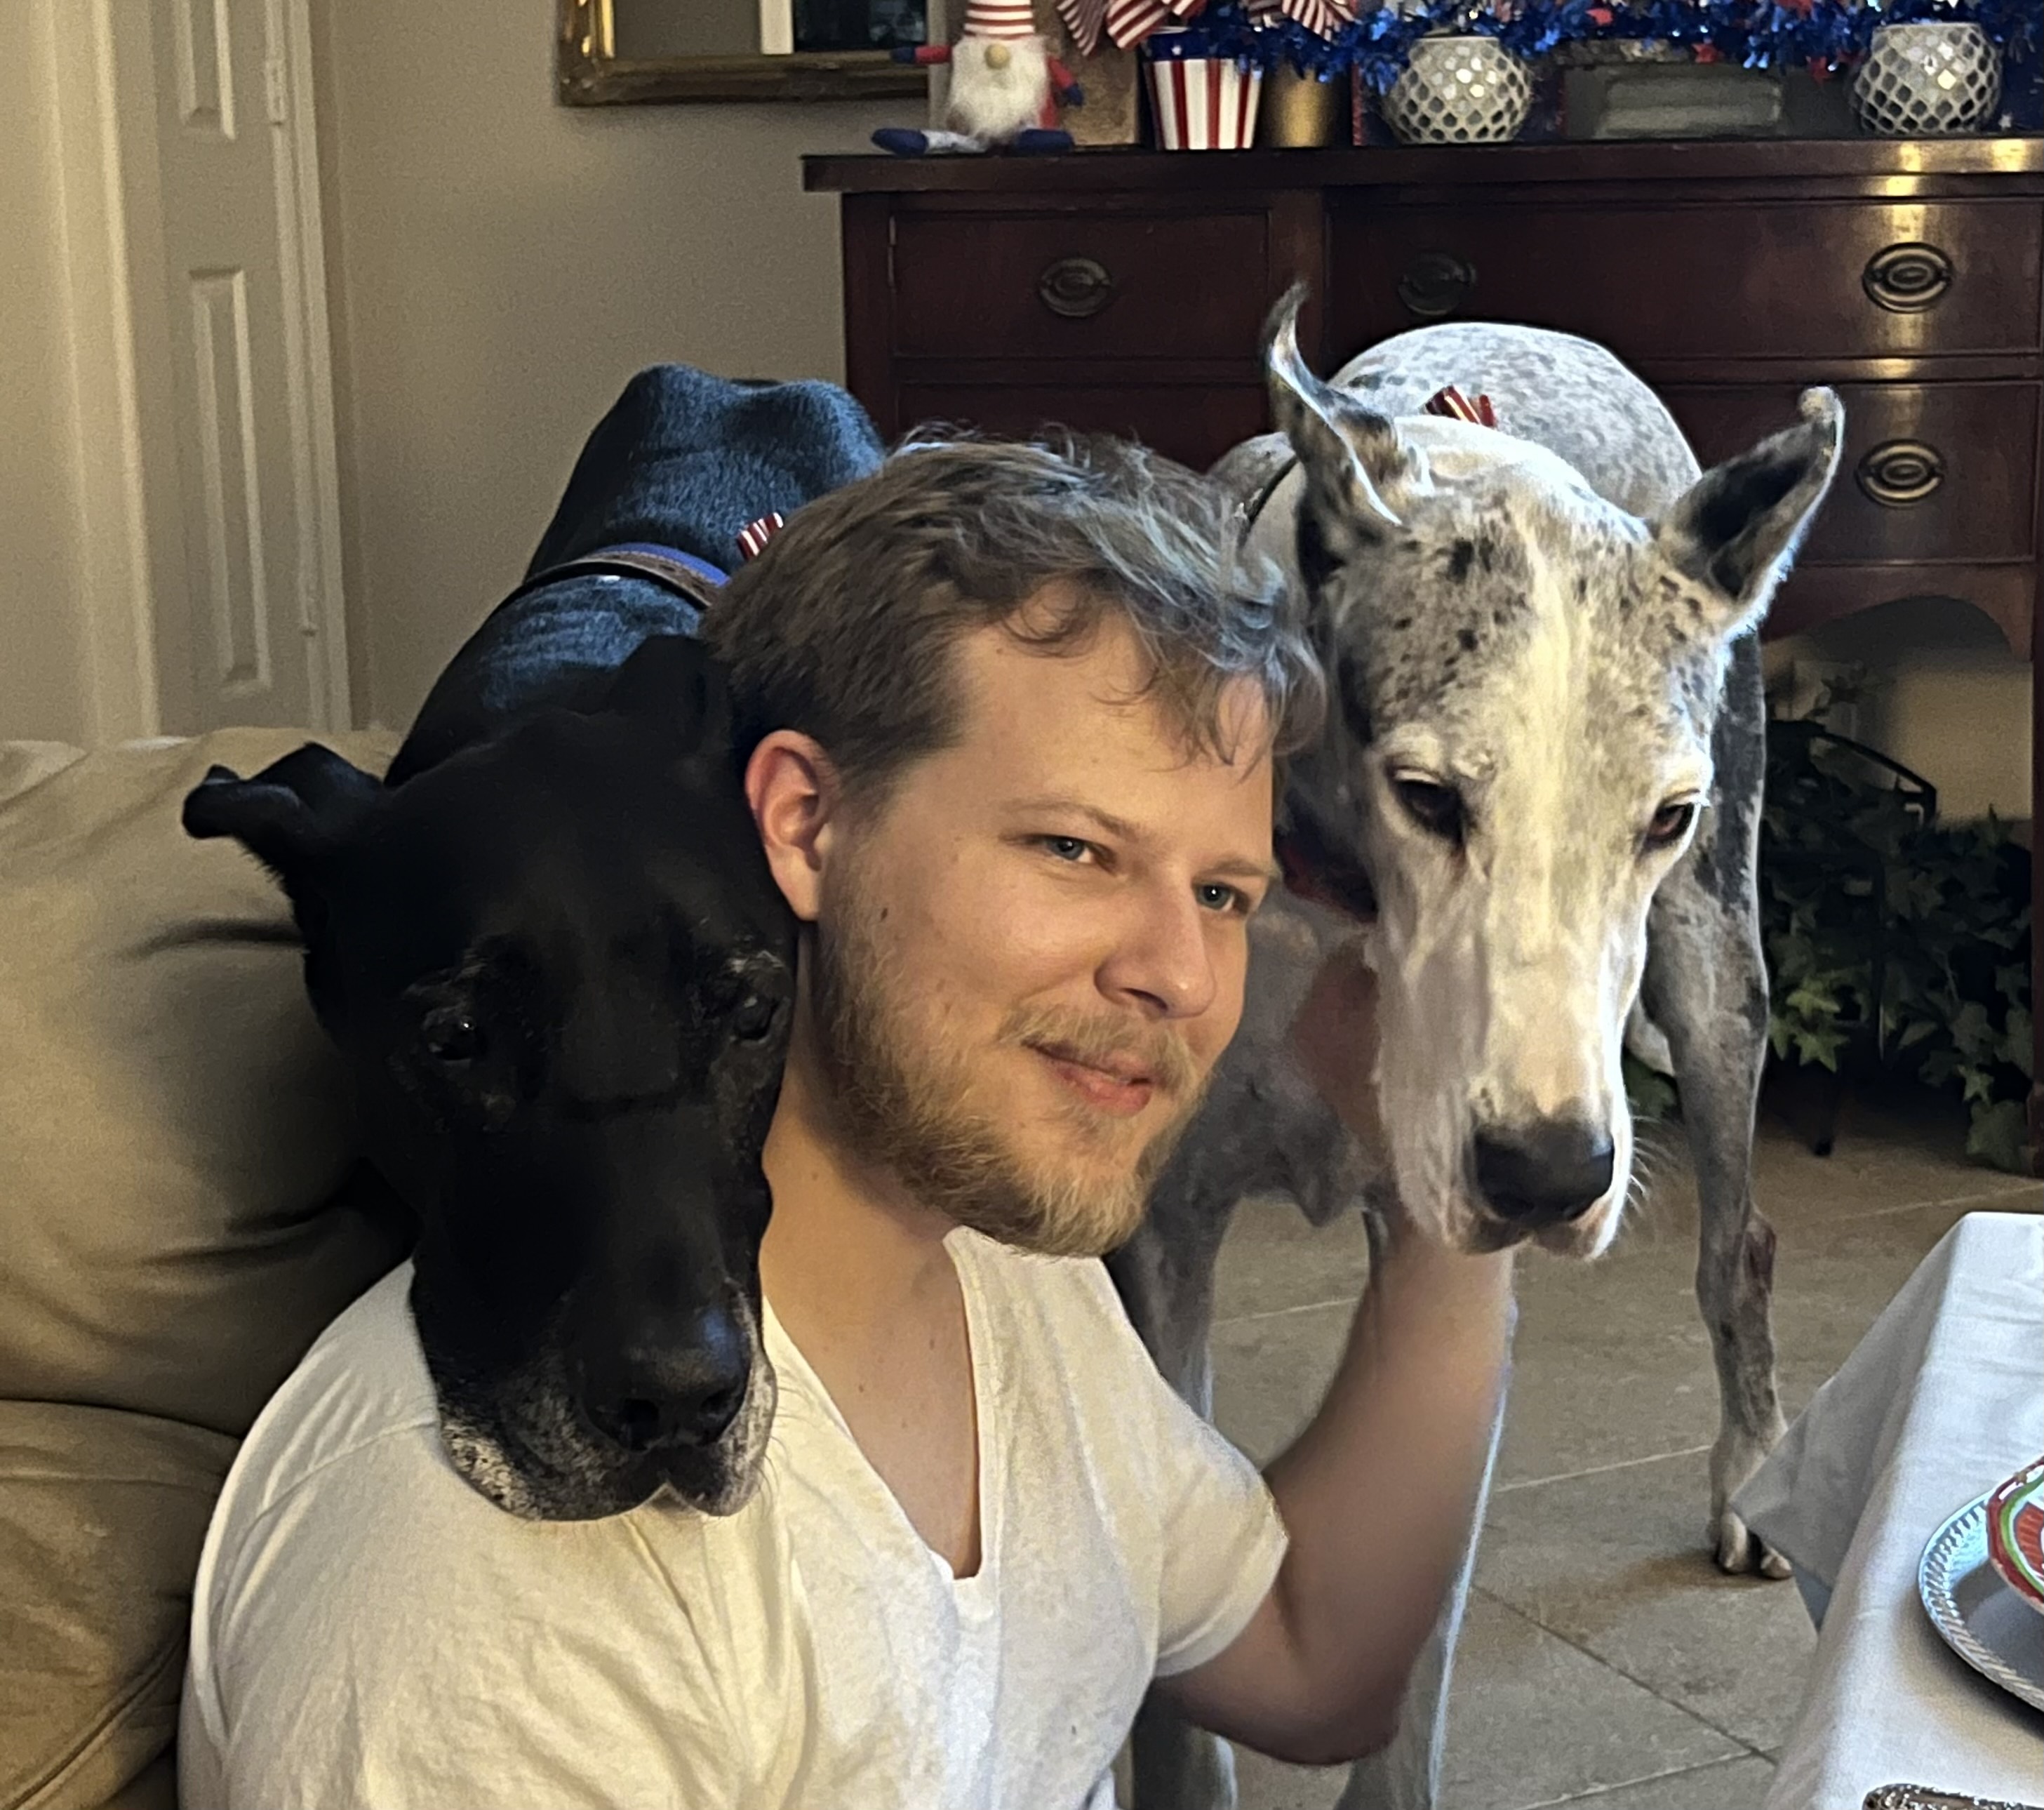 Thomas Tripp with two dogs